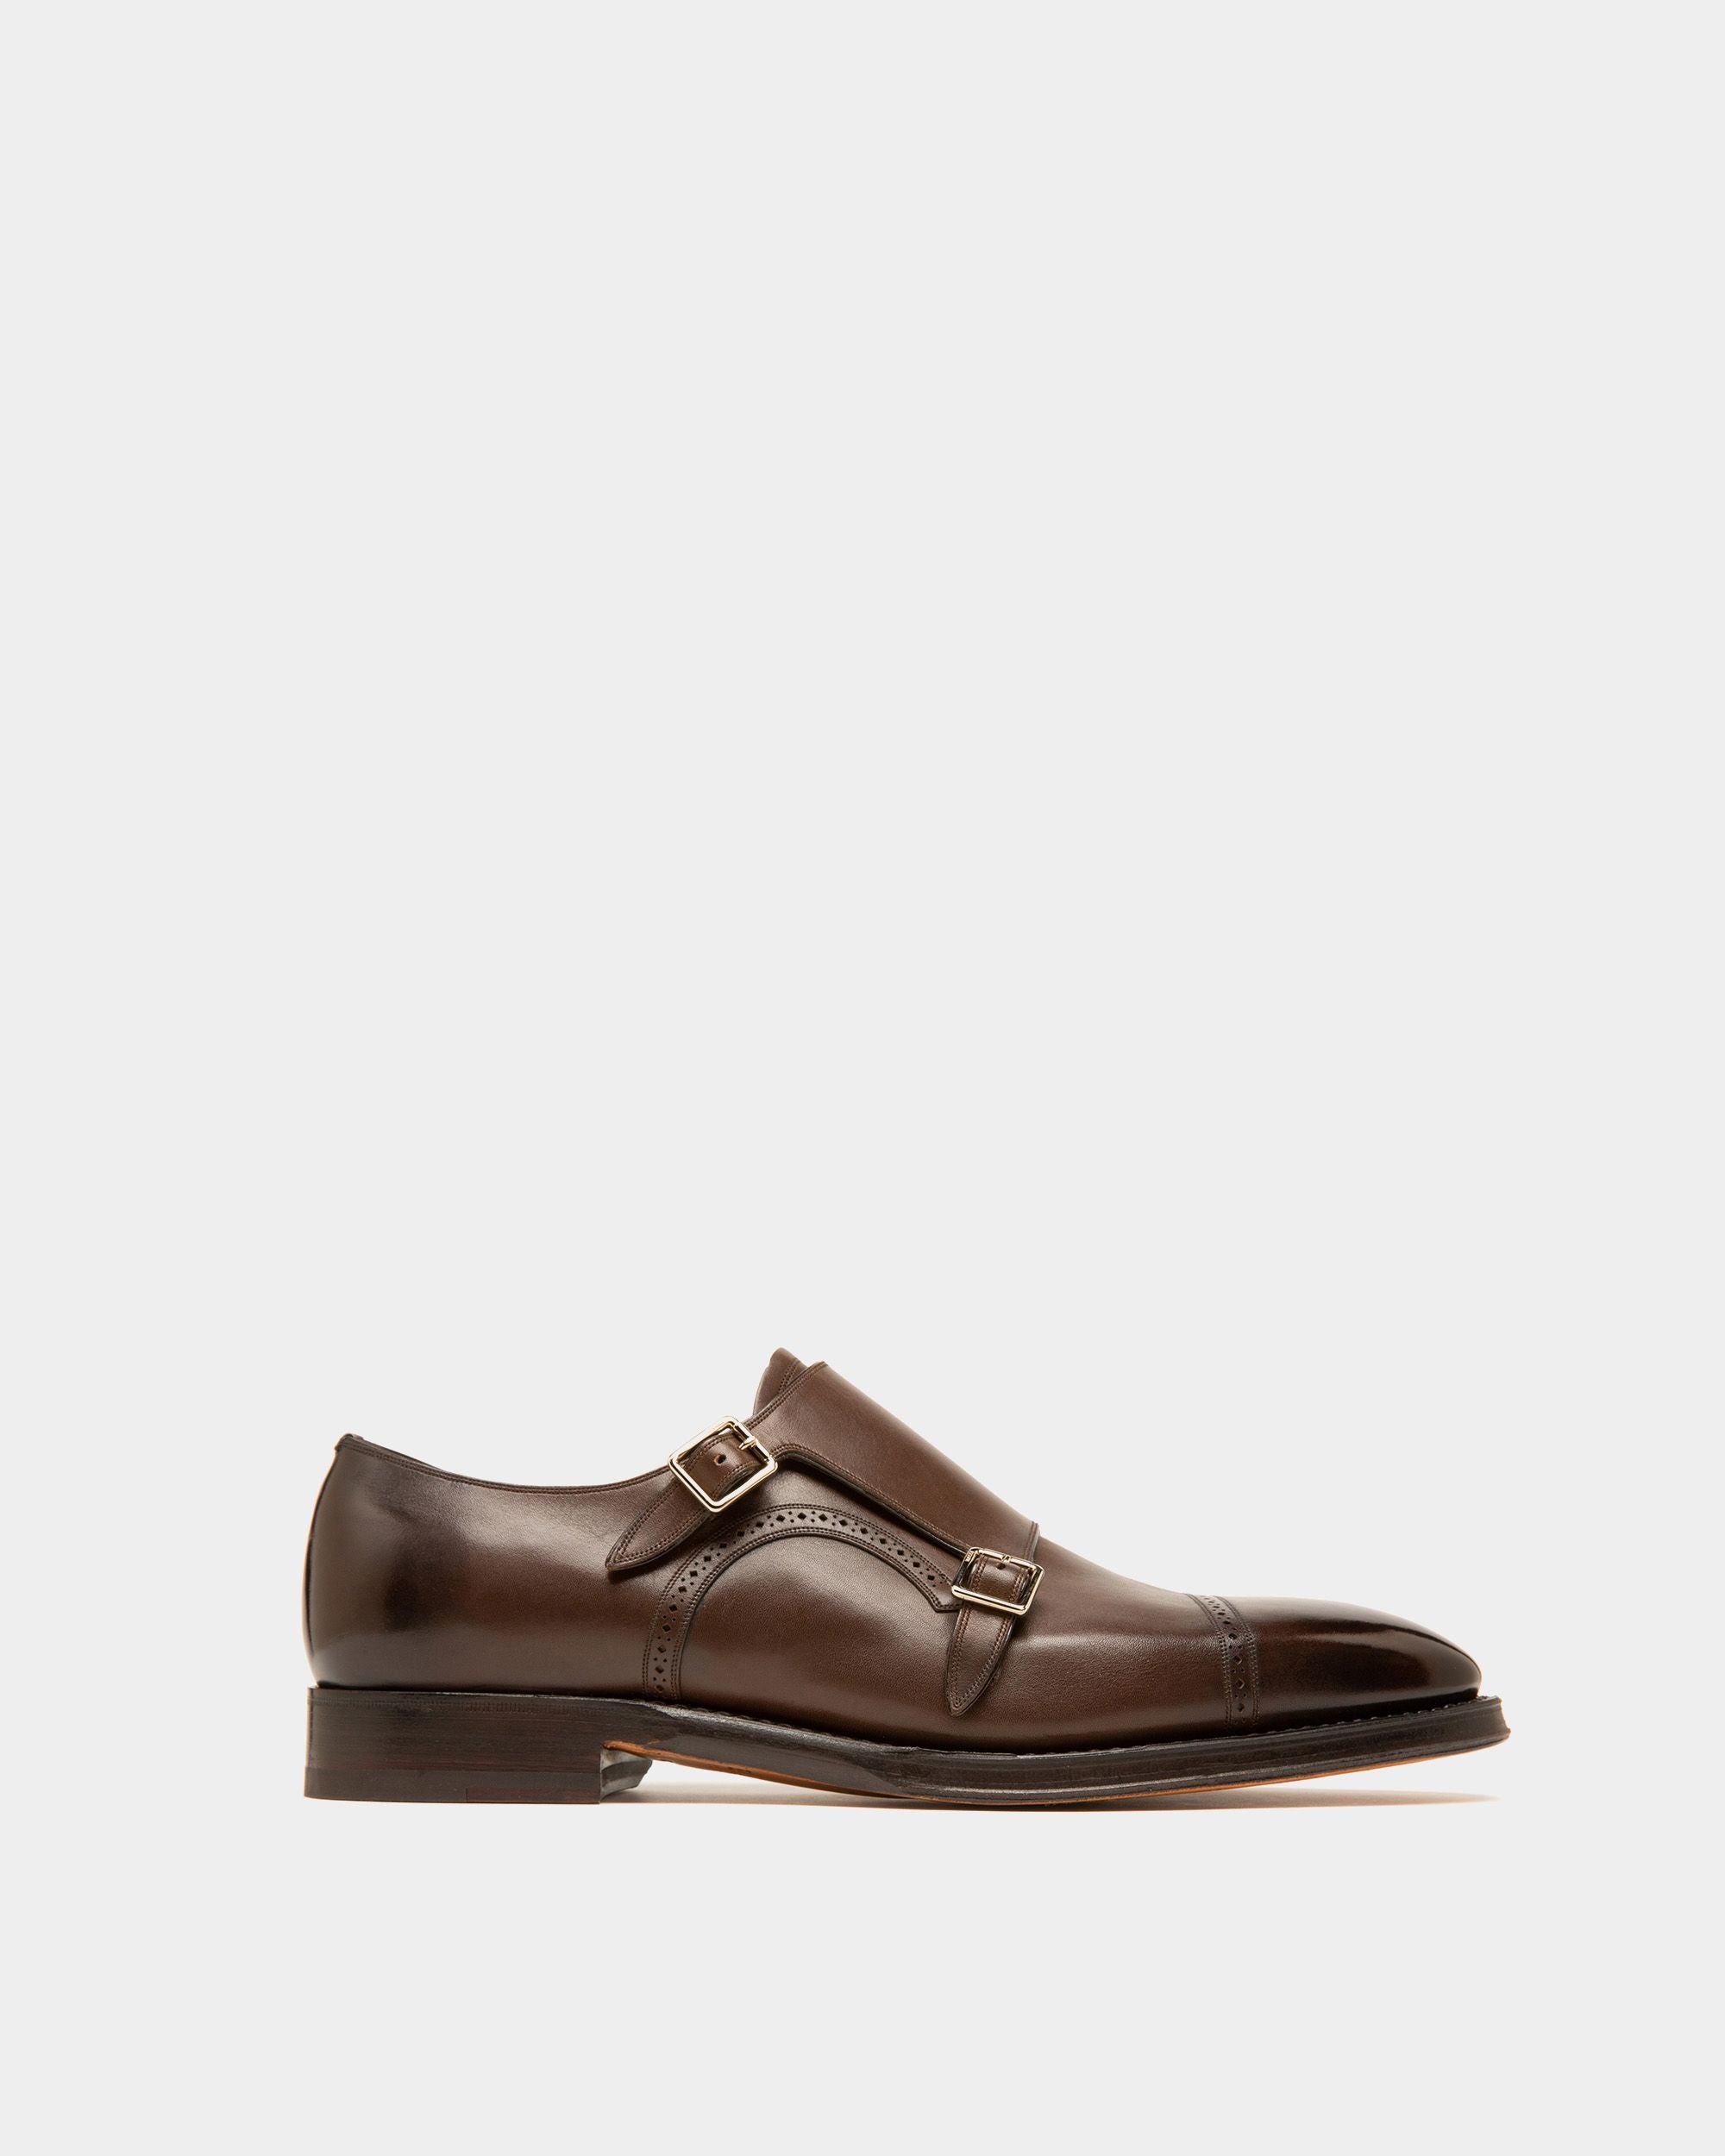 Scardino | Men's Loafers | Brown Leather | Bally | Still Life Side